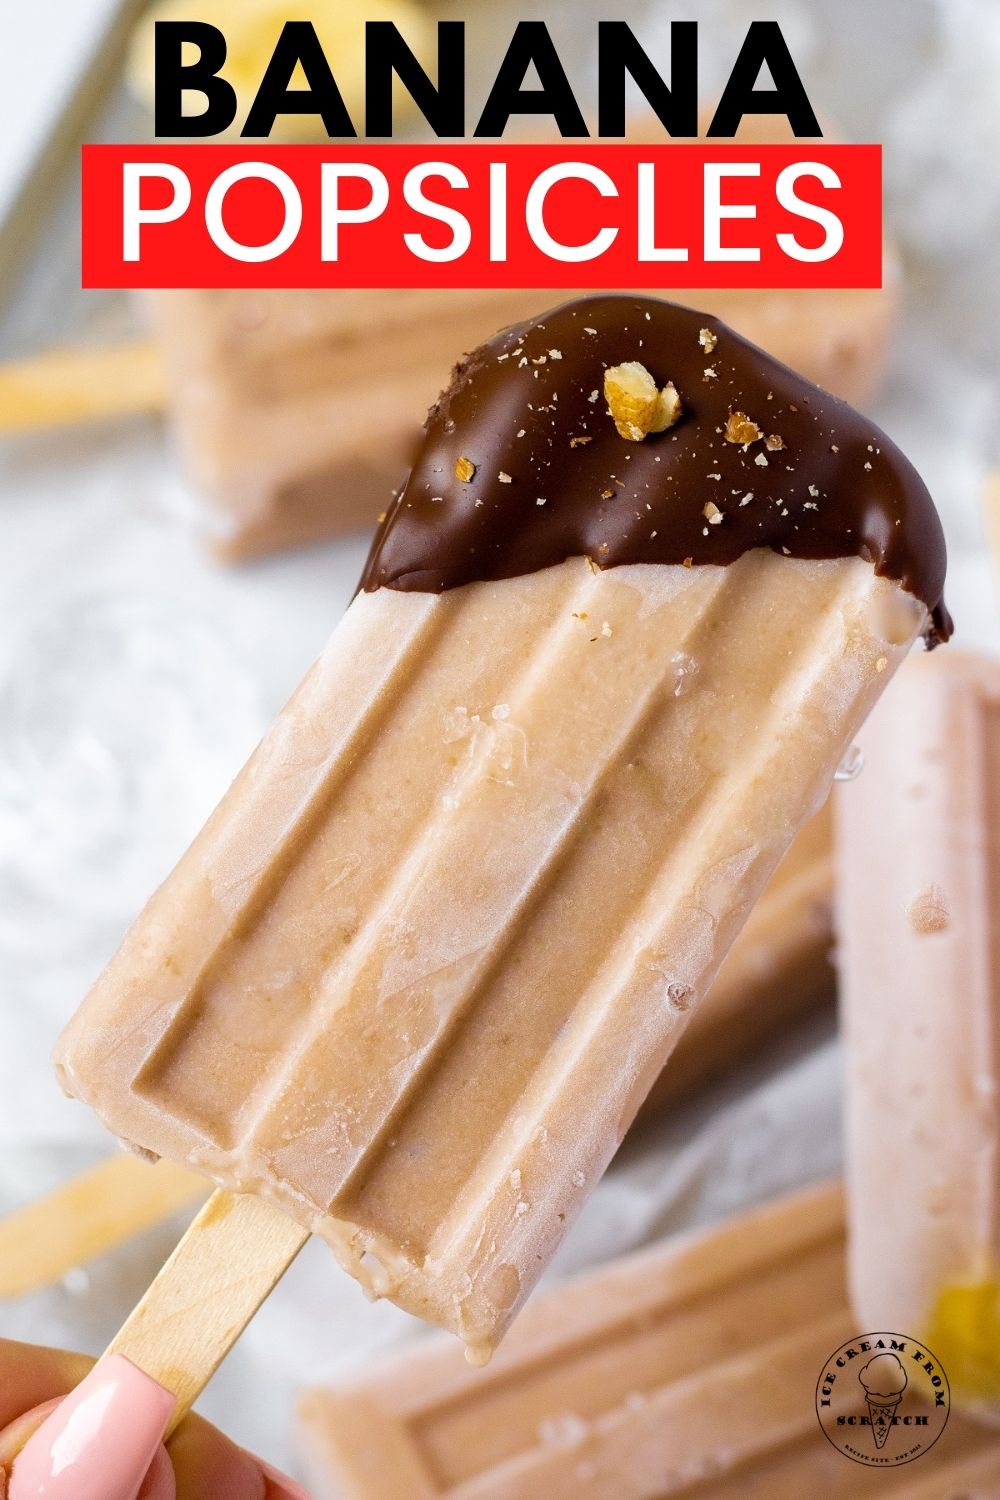 a light brown banana popsicle with just the top dipped in chocolate, sprinkled with chopped walnuts. Text overlay says Banana Popsicles